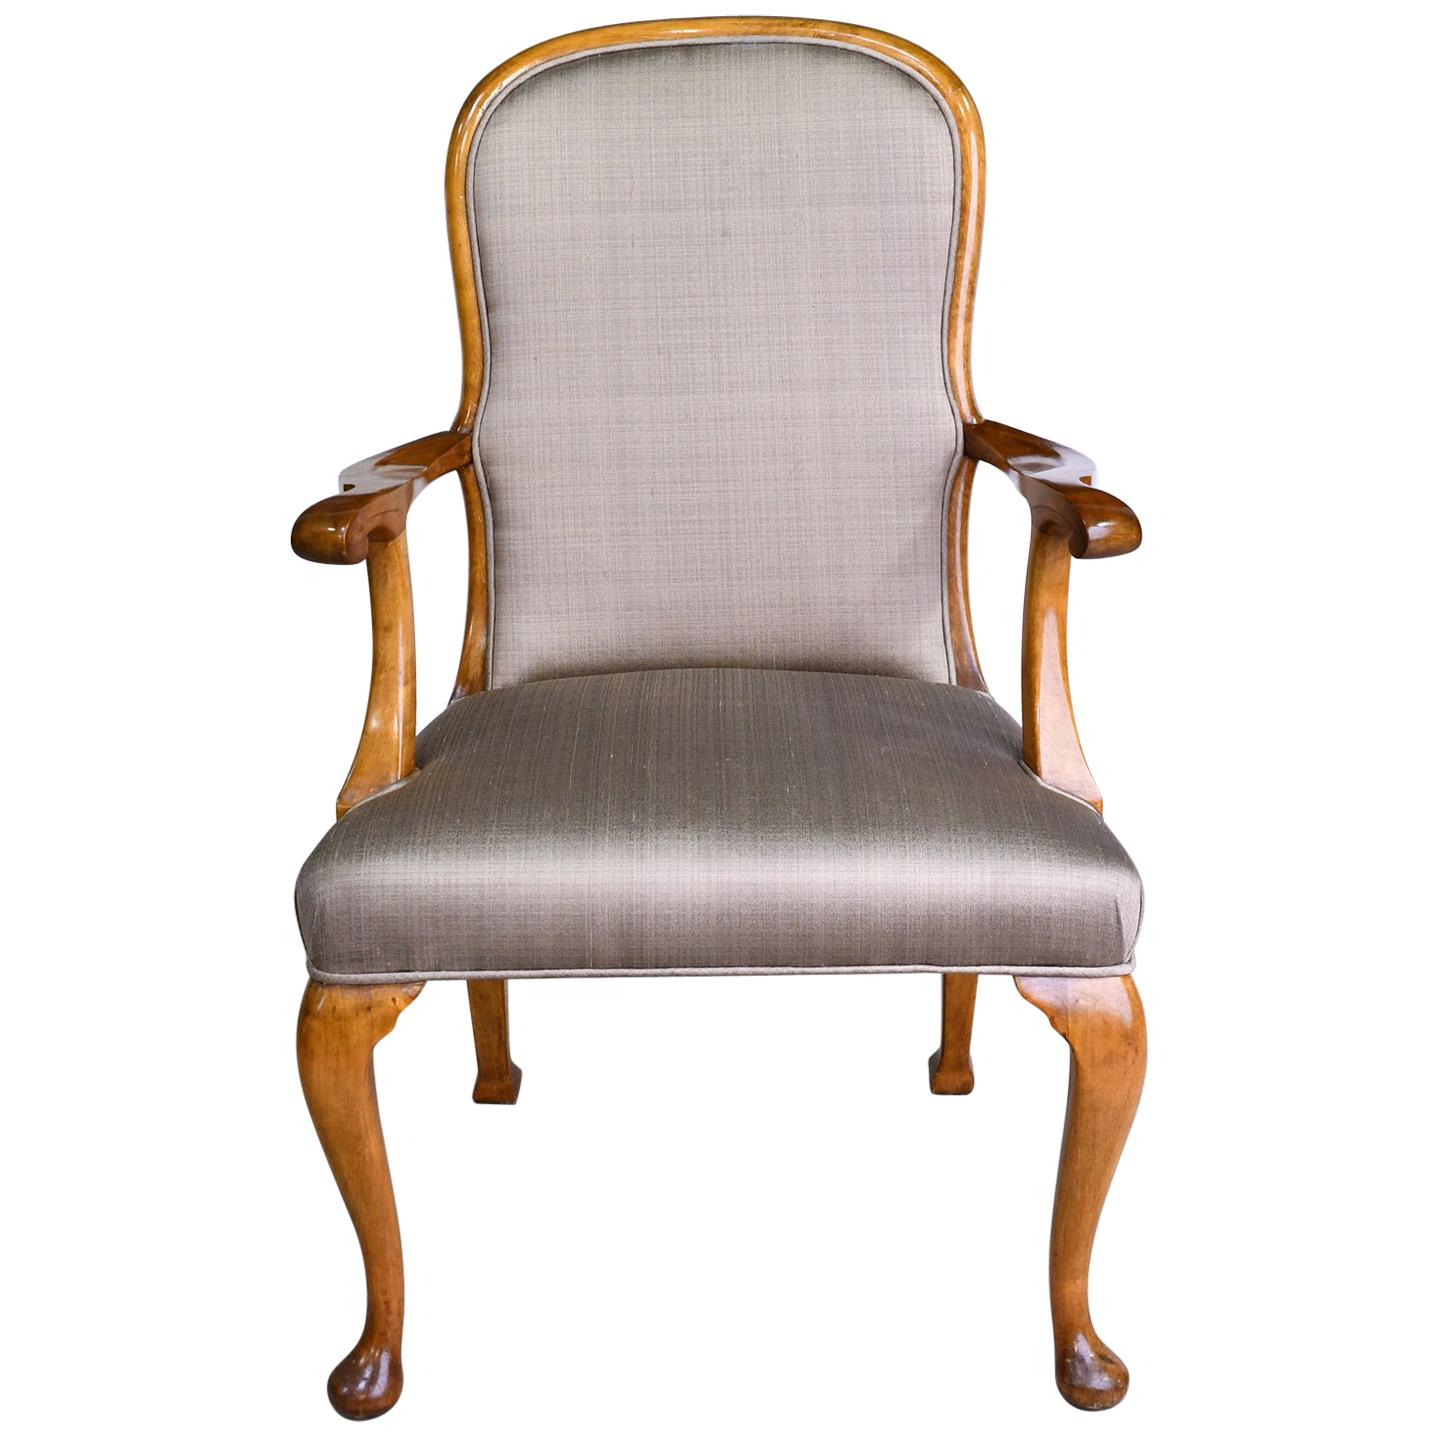 Queen Anne Set of 10 Mid-20th Century Birch Dining Chairs with Upholstered Back & Seats